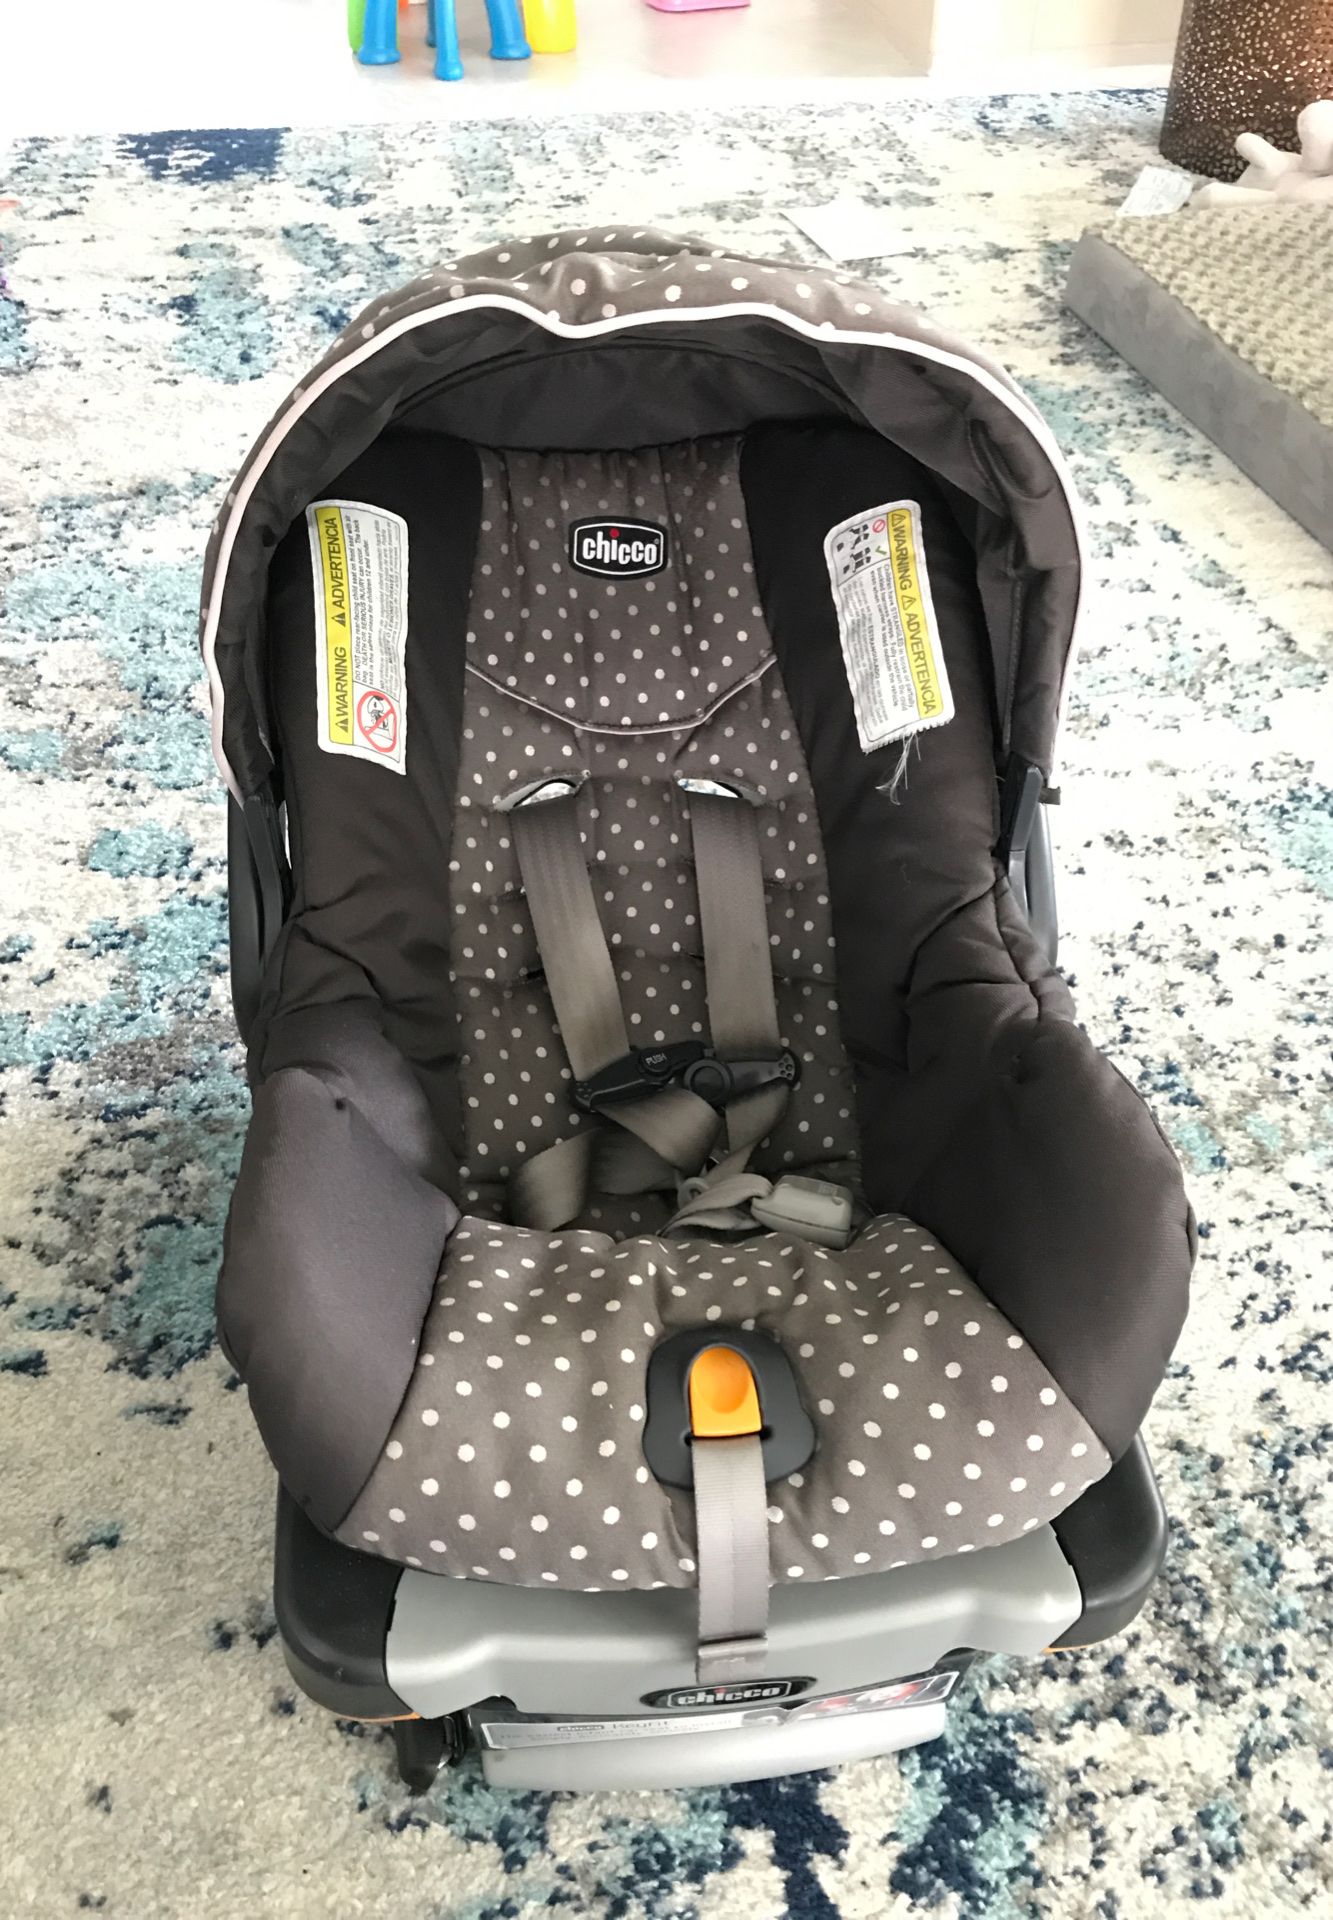 1 year old Chicco keyfit 30 infant car seat- pristine condition